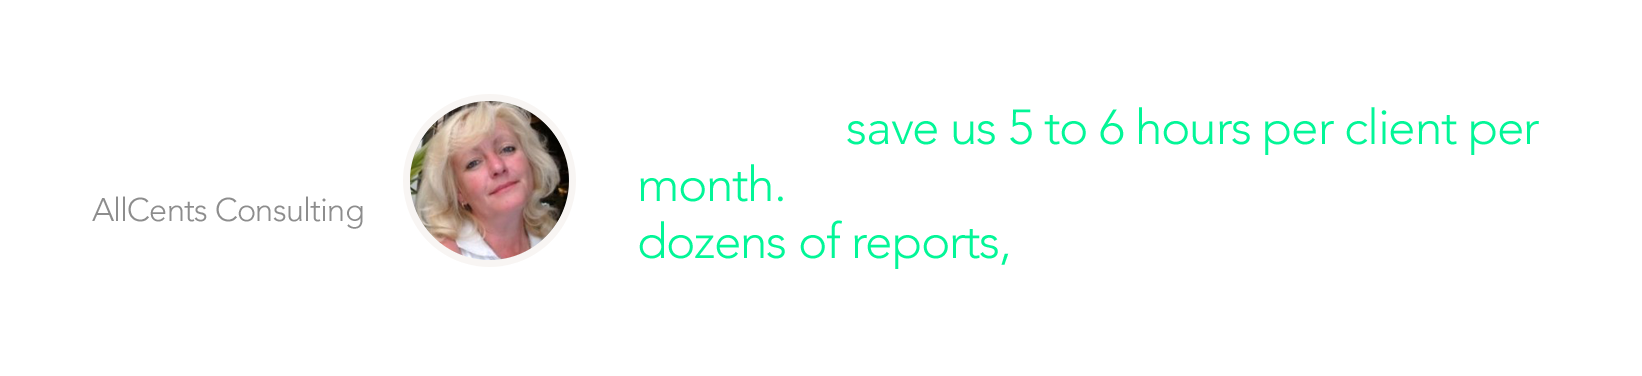 Digits will save us 5 to 6 hours per client per month. When you're preparing an analyzing dozens of reports, that adds up fast. - Jackie Anthony AllCents Consulting